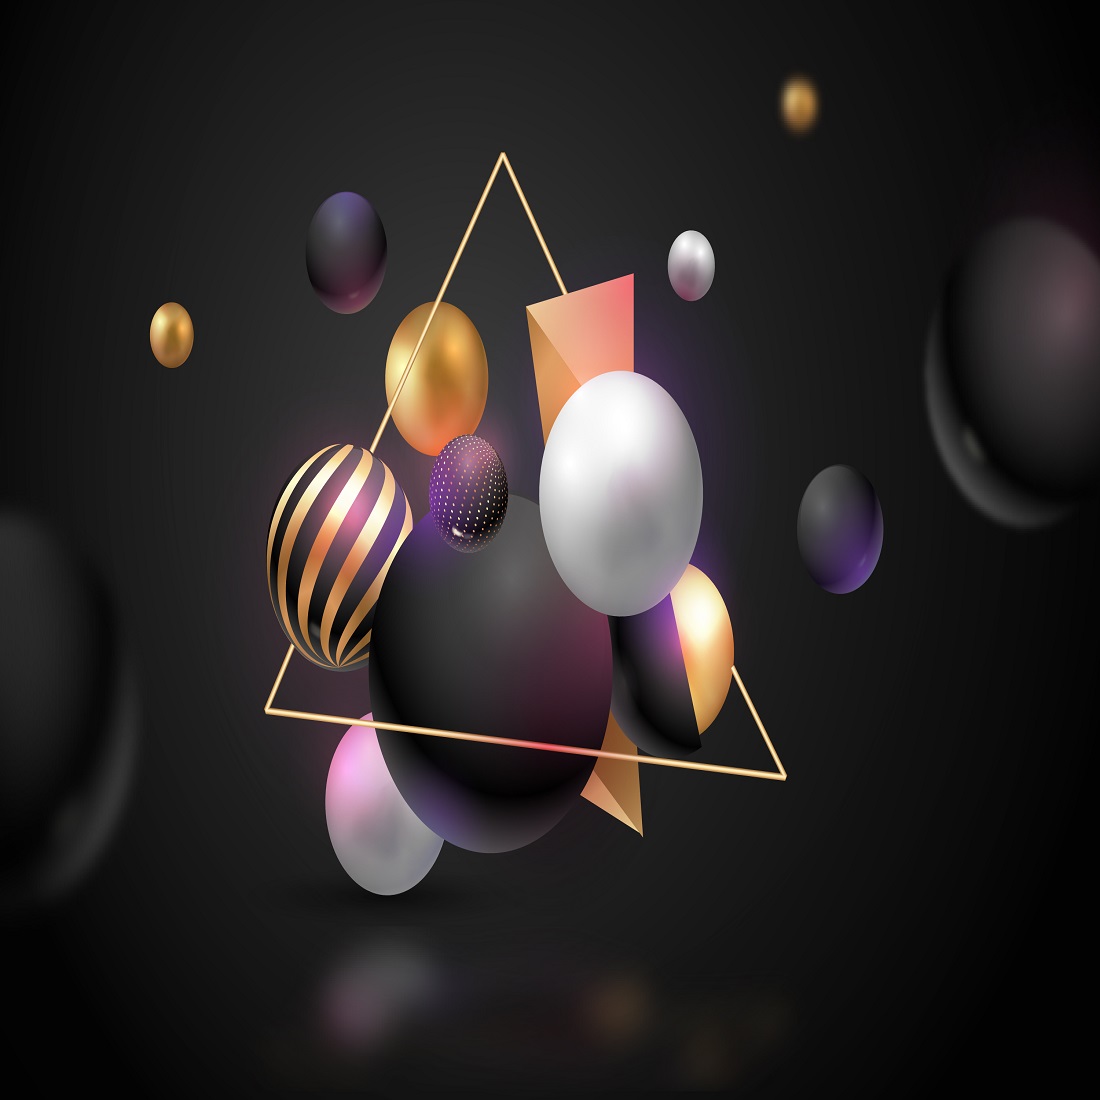 Metallic 3d spheres background preview image.